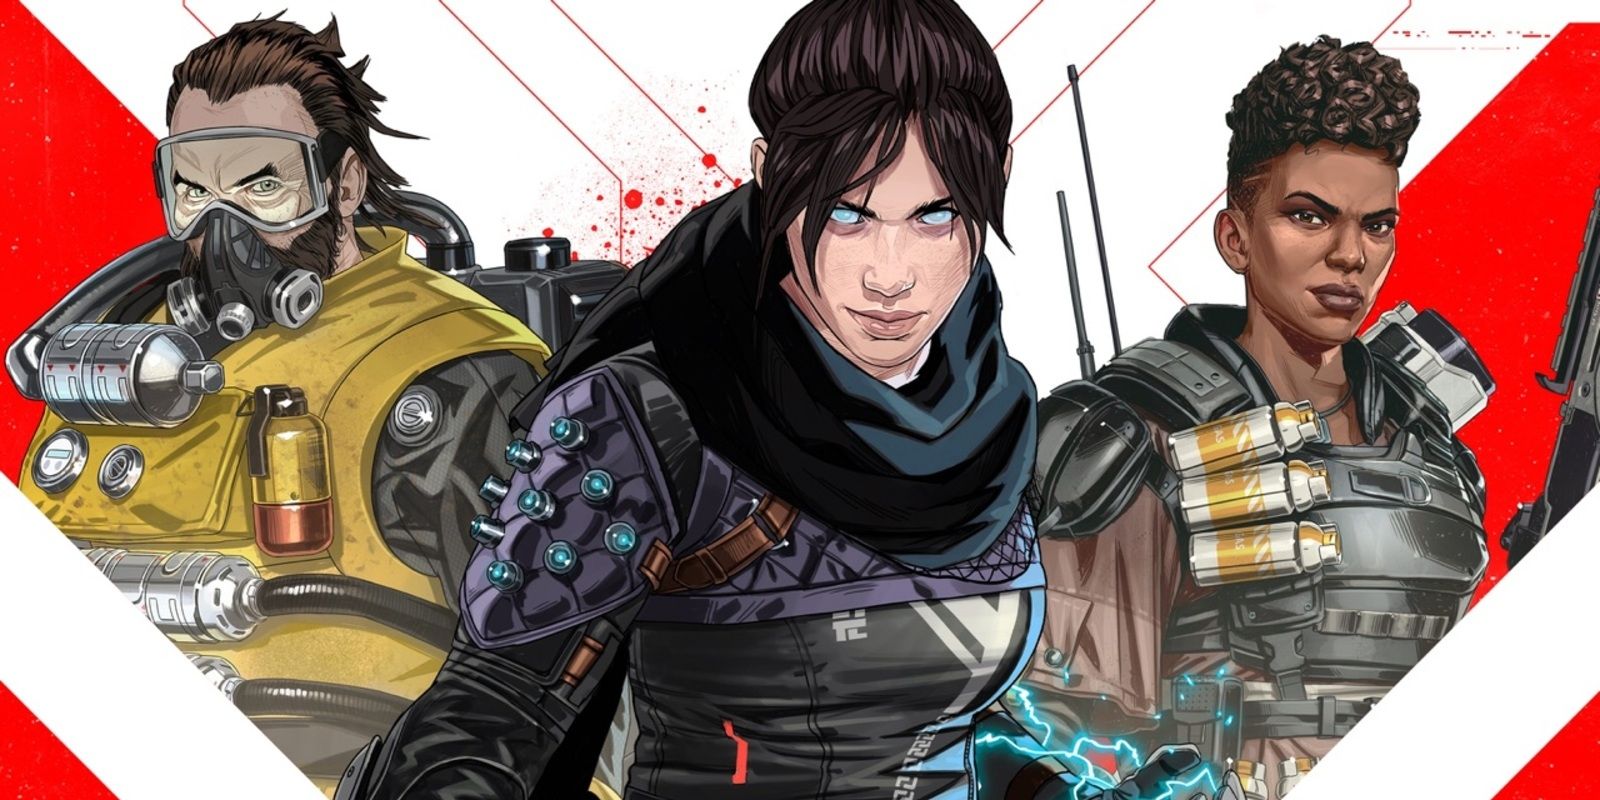 Apex Legends Mobile art with Legends Caustic, Wraith and Bangalore